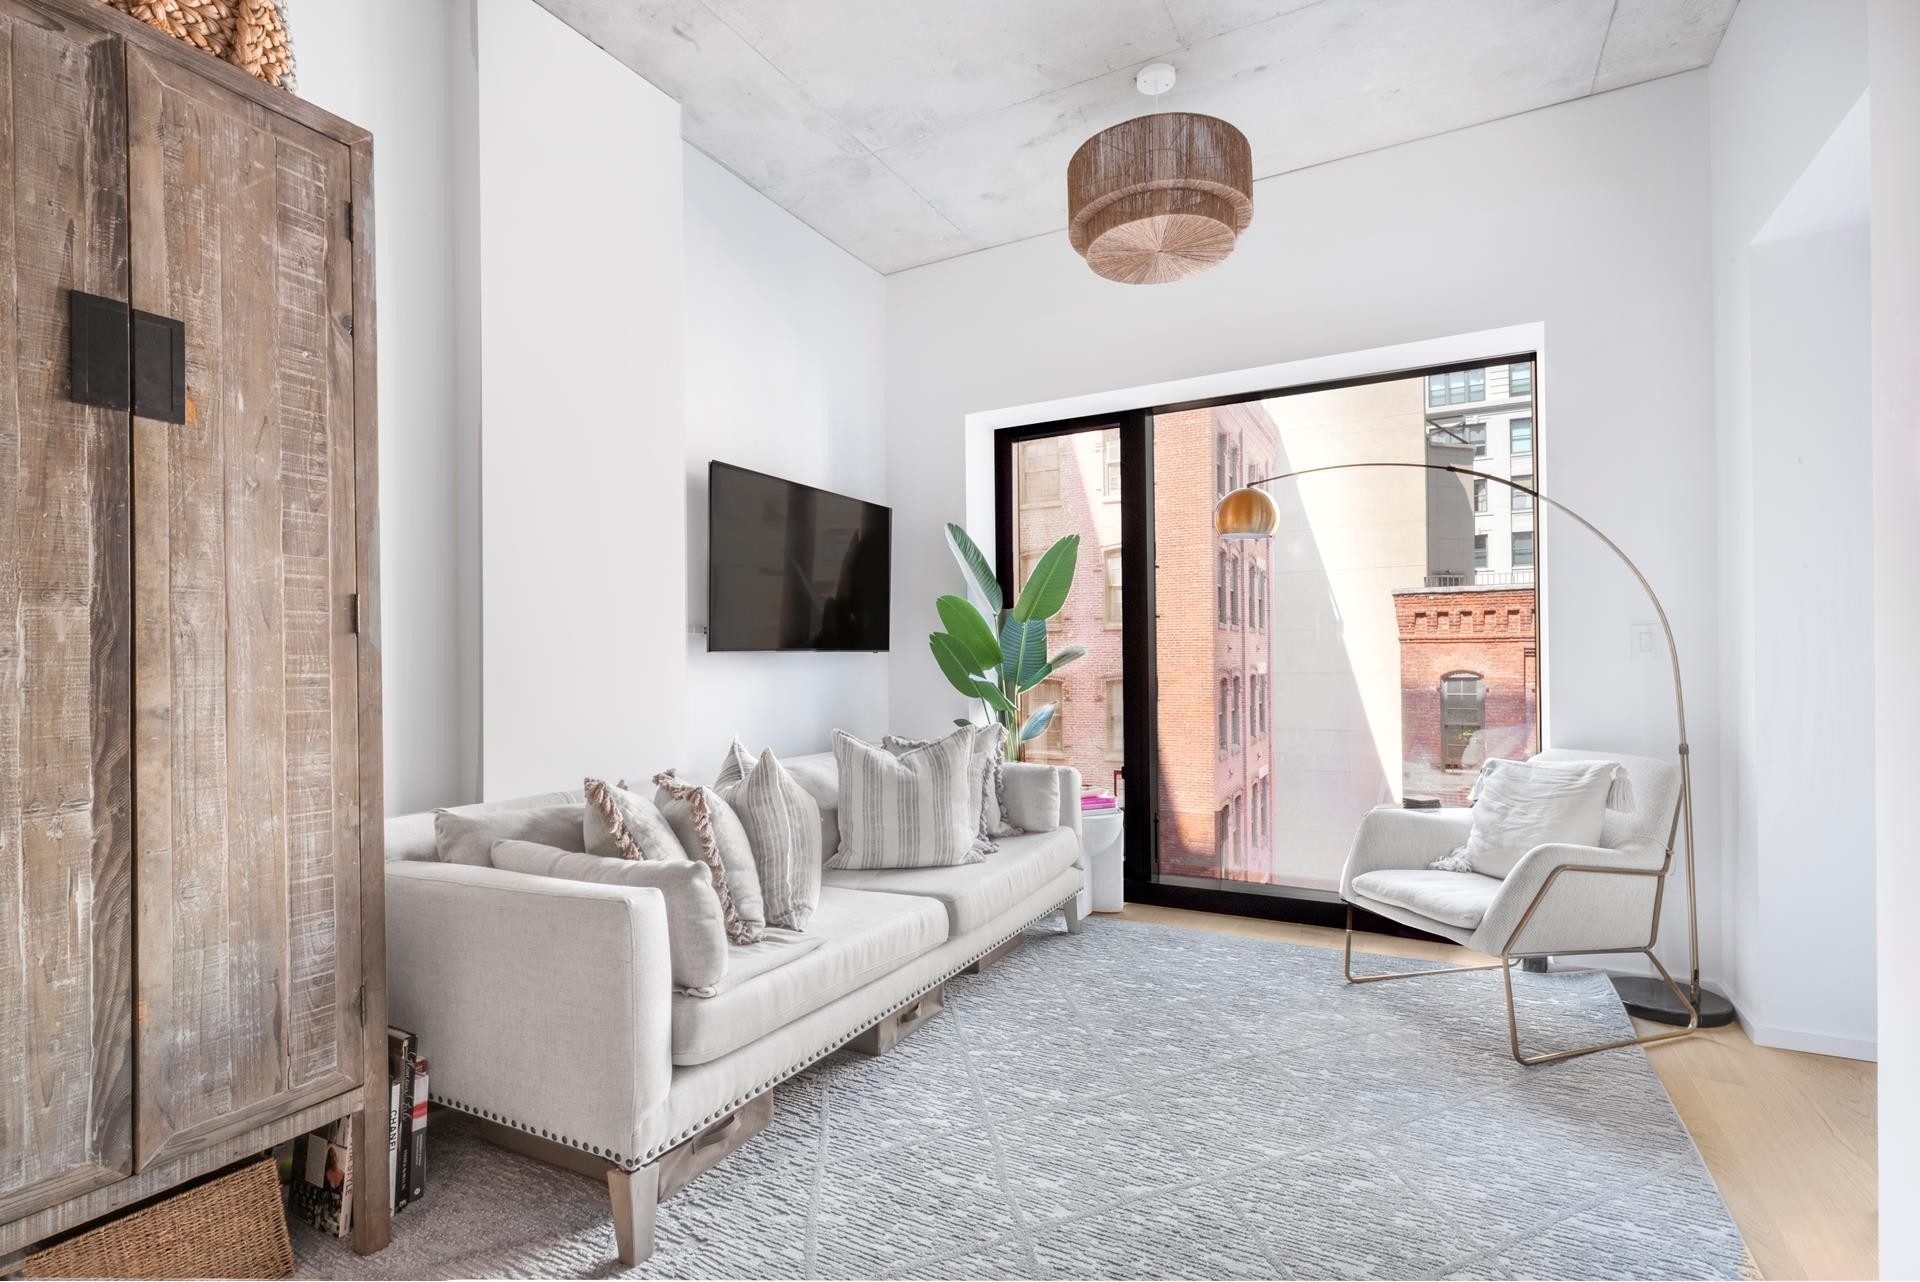 Property at 98 FRONT ST, 7R DUMBO, Brooklyn, New York 11201